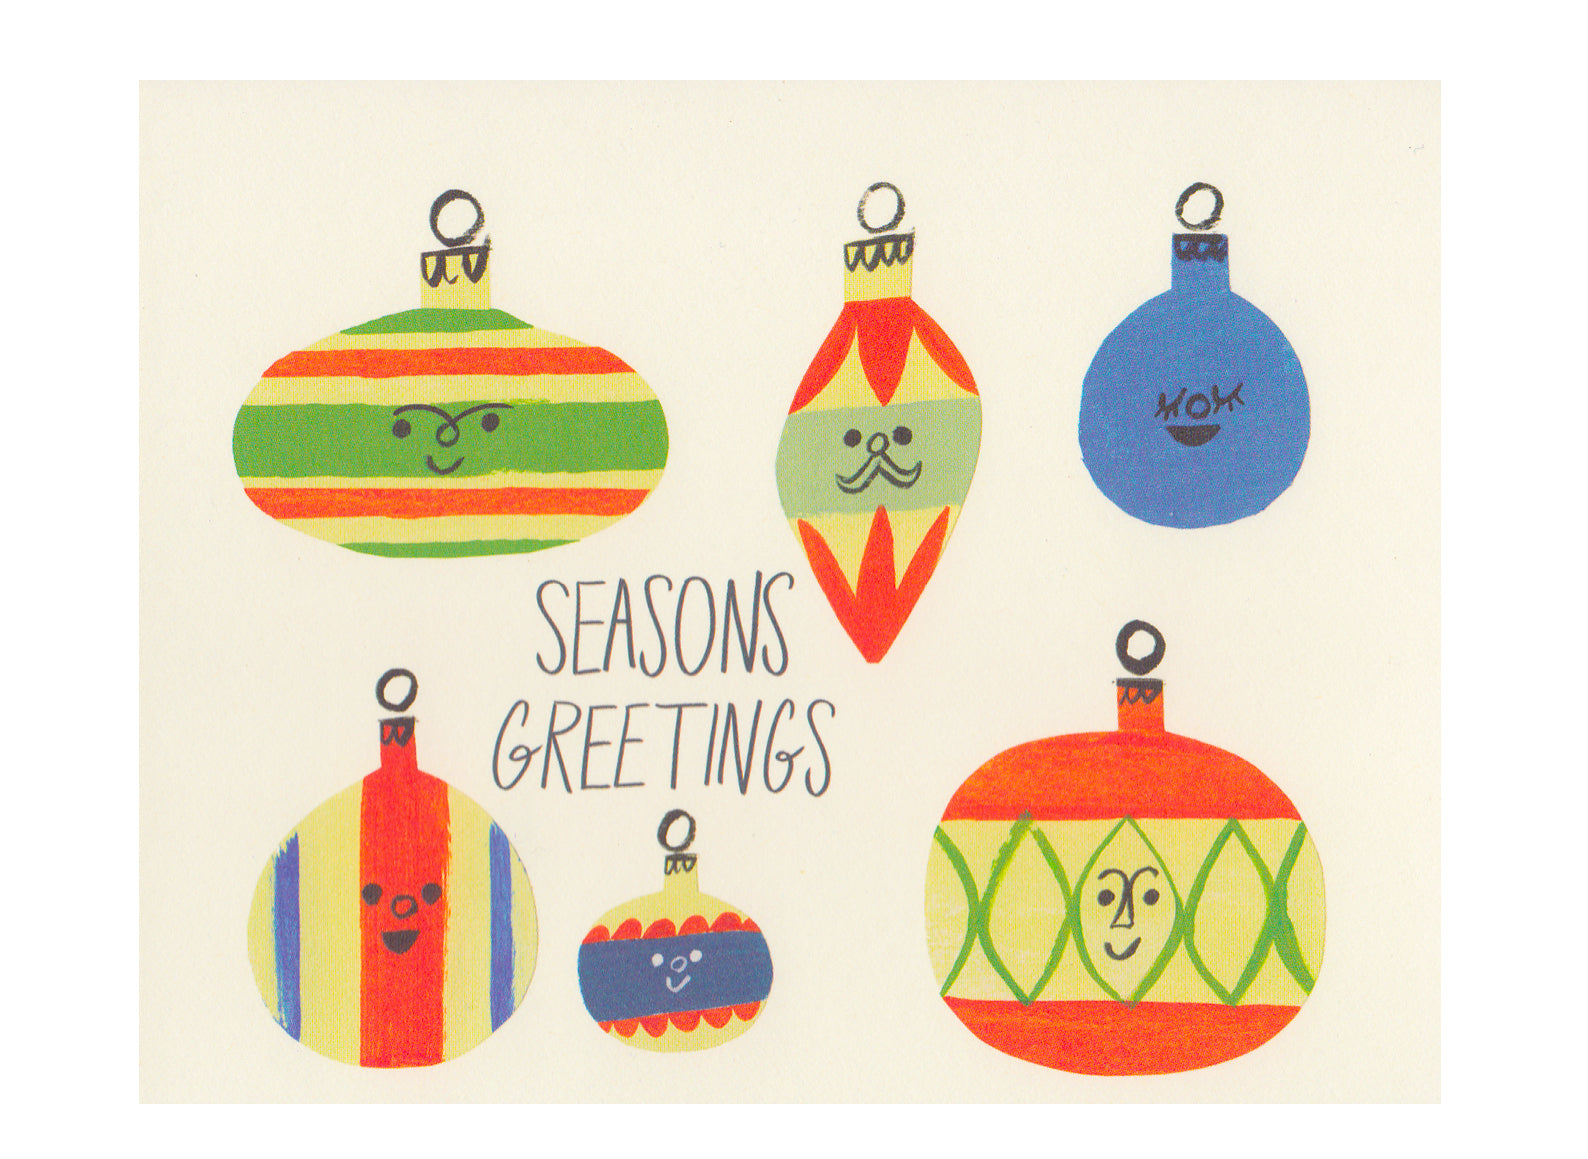 illustrated christmas ornaments with faces and text reads seasons greetings. cream background